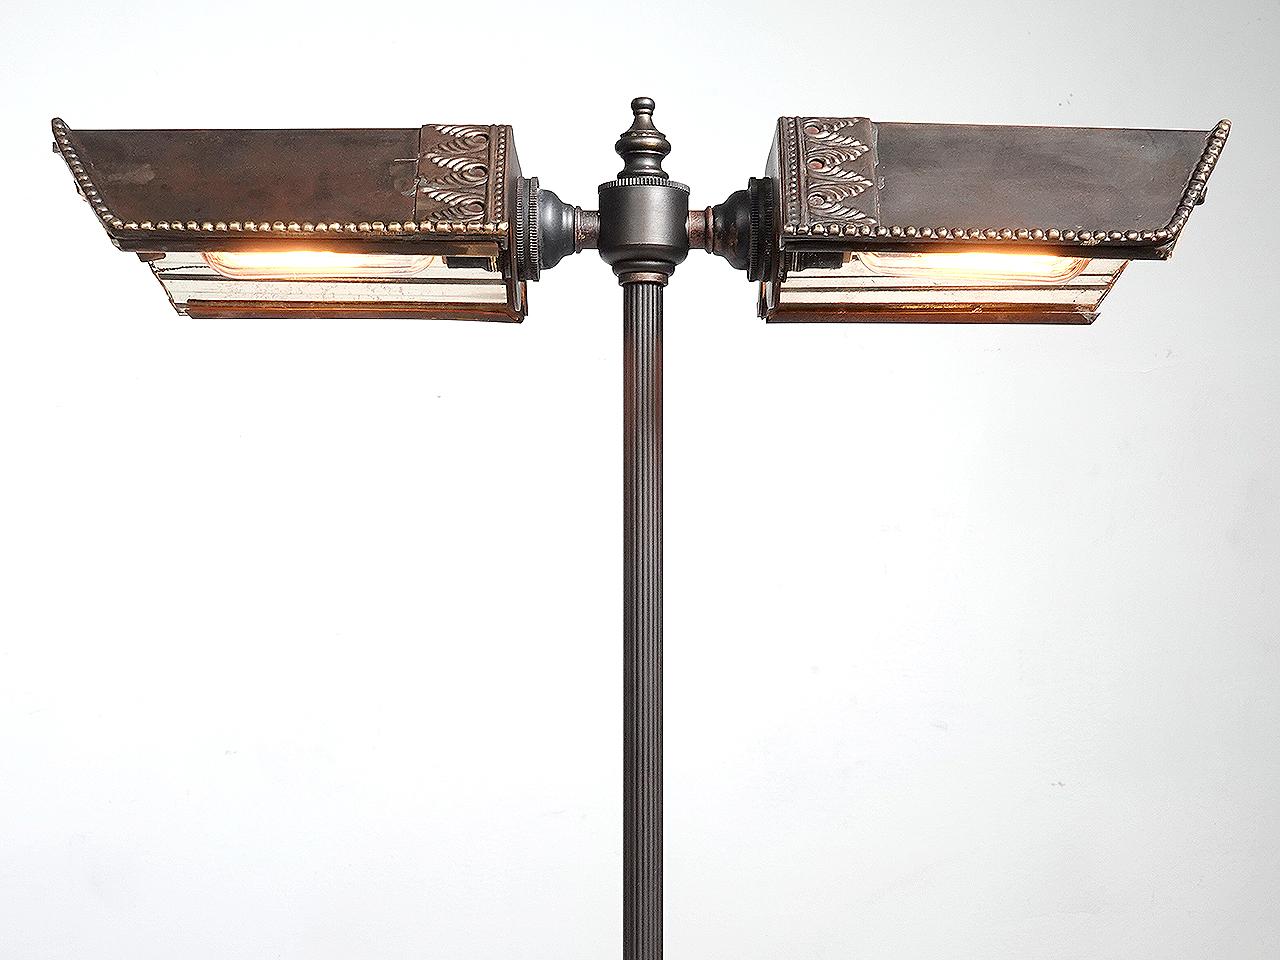 This is a rich looking desk lamp with out being too decorative. It has the simple elegant look of a bankers lamp. Each of the 2 shades have 3 fluted reflector mirrors often found on early 20th-Century lamps manufactured by the Frink Lighting